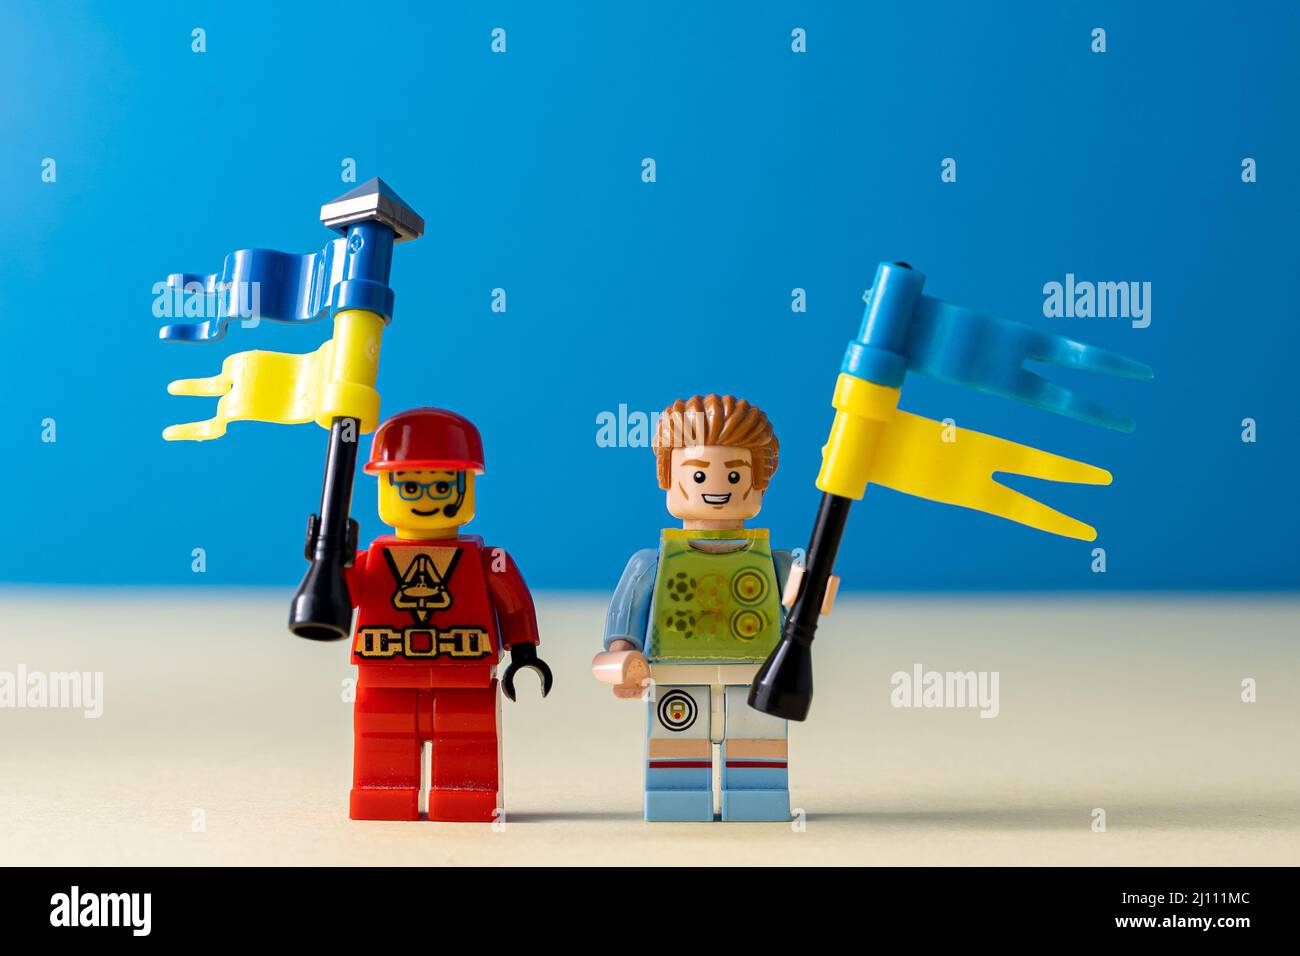 Lego little men with flags of Ukraine. A minifigure toy man holding a blue flag. Support of the Ukrainian people. Ukraine, Kyiv - March 20, 2022. Stock Photo